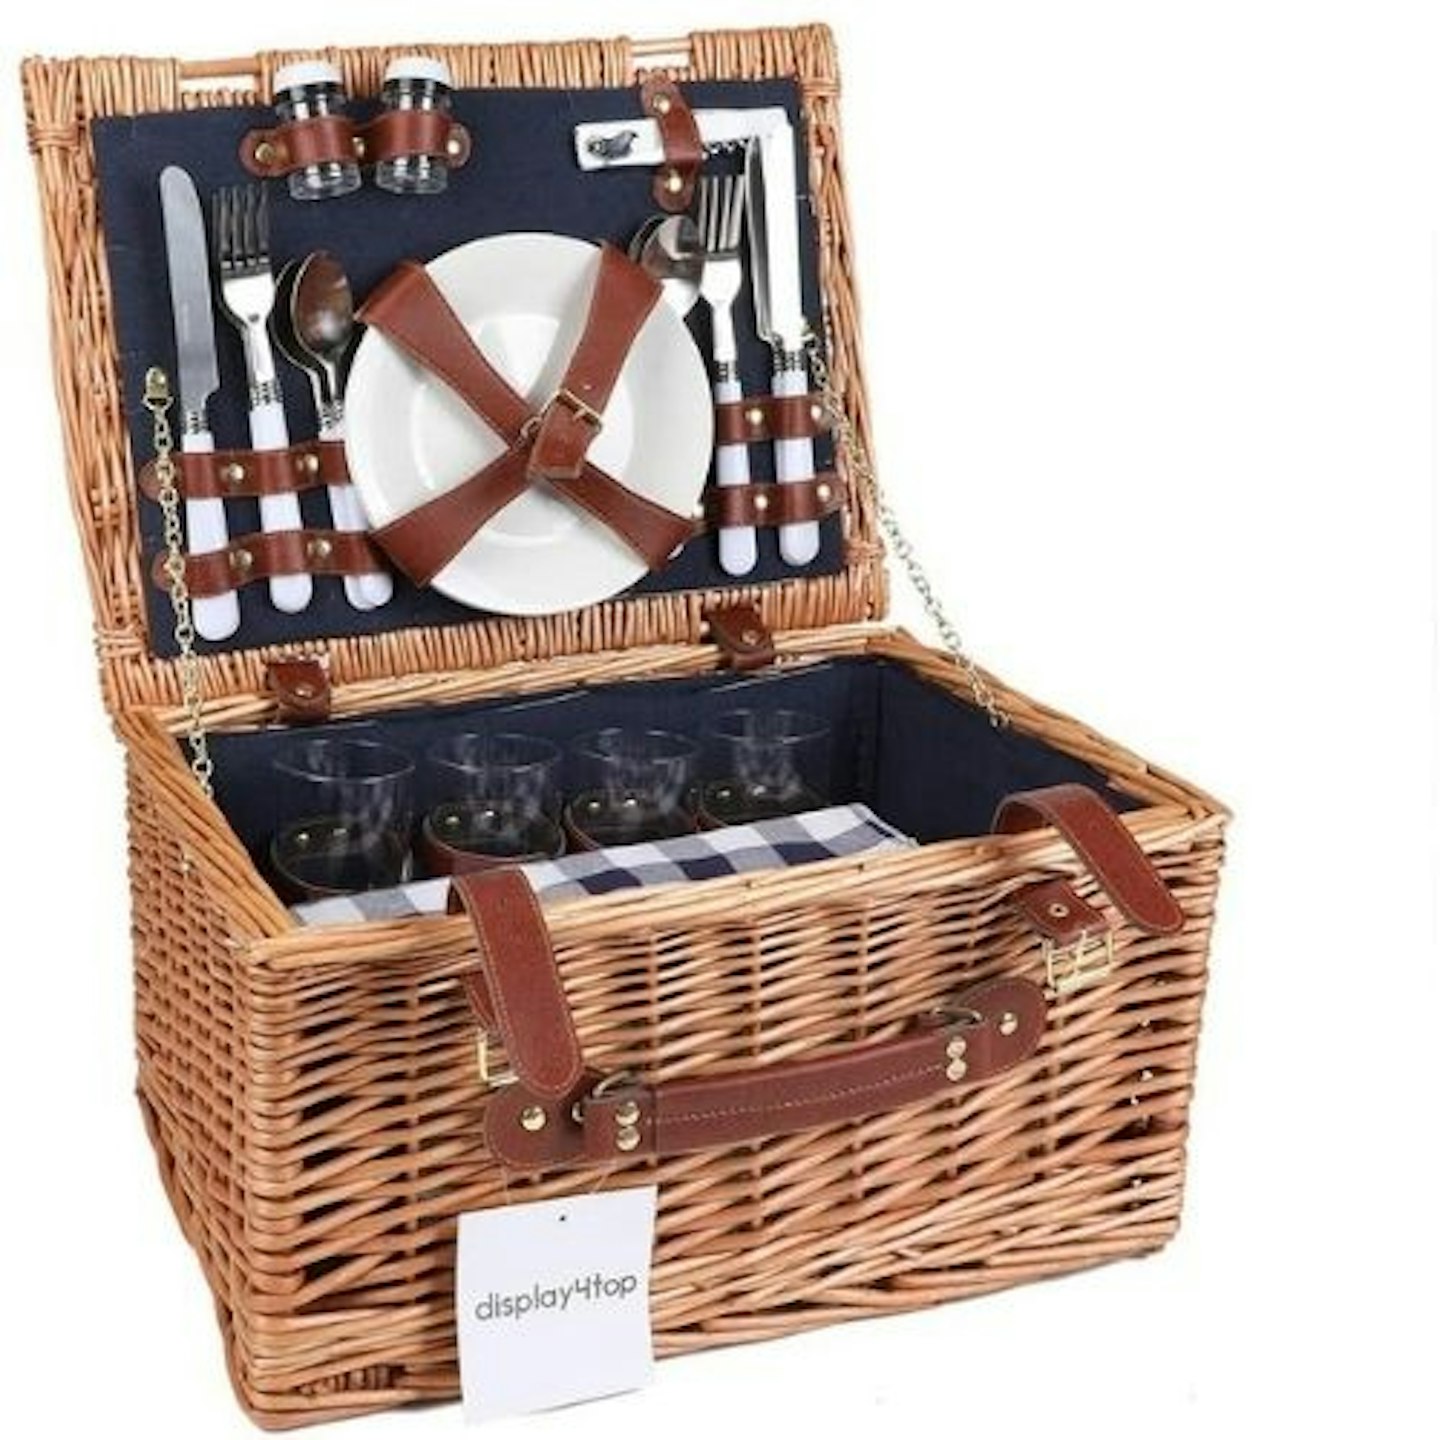 Display4top Deluxe 4 Person Traditional Wicker Picnic Basket